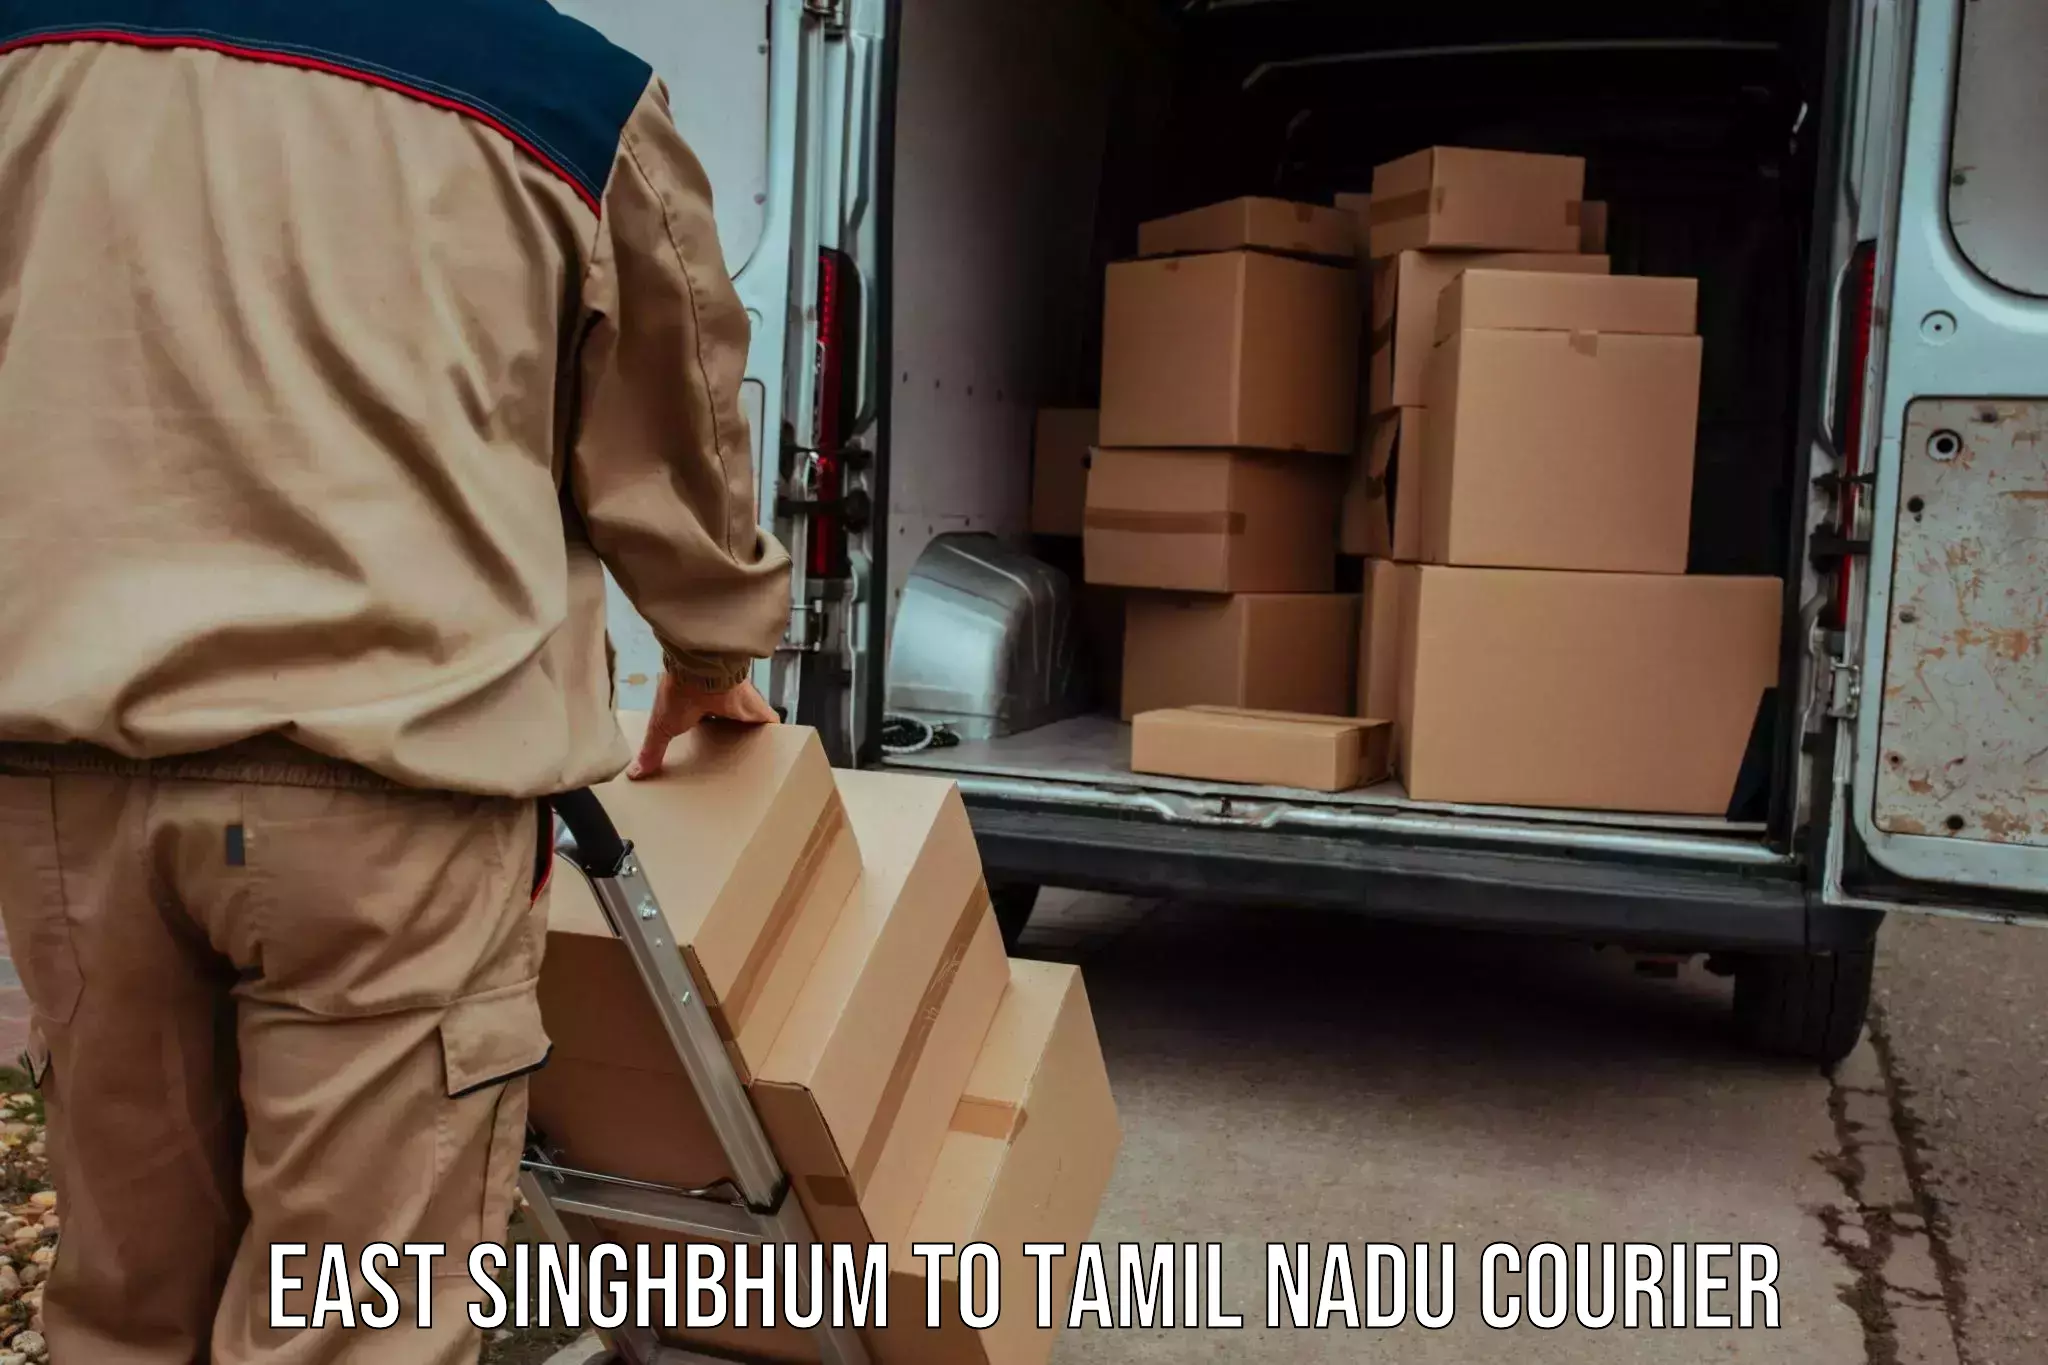 Express package transport East Singhbhum to Sri Ramachandra Institute of Higher Education and Research Chennai